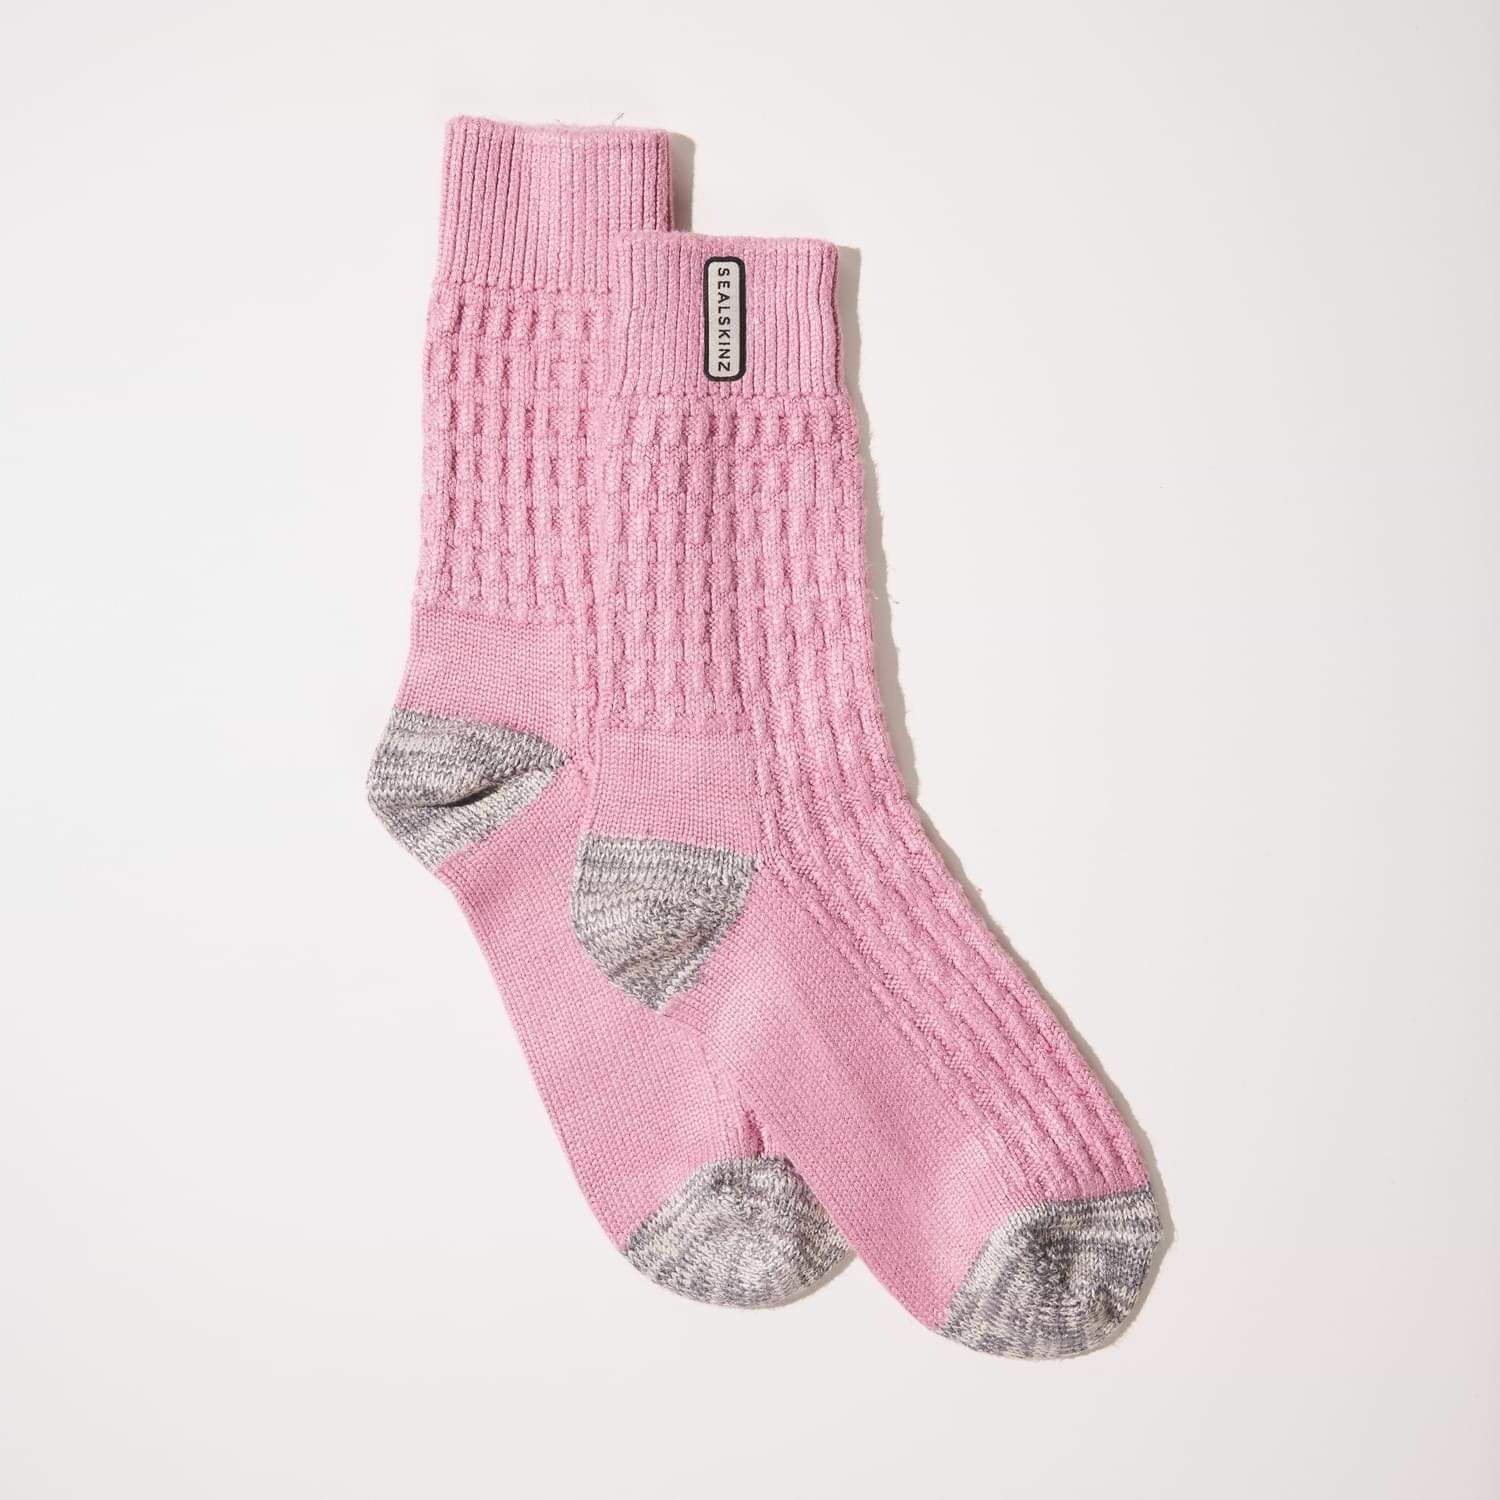 Cotton Socks - Coral with Pink and Cream Bonefish